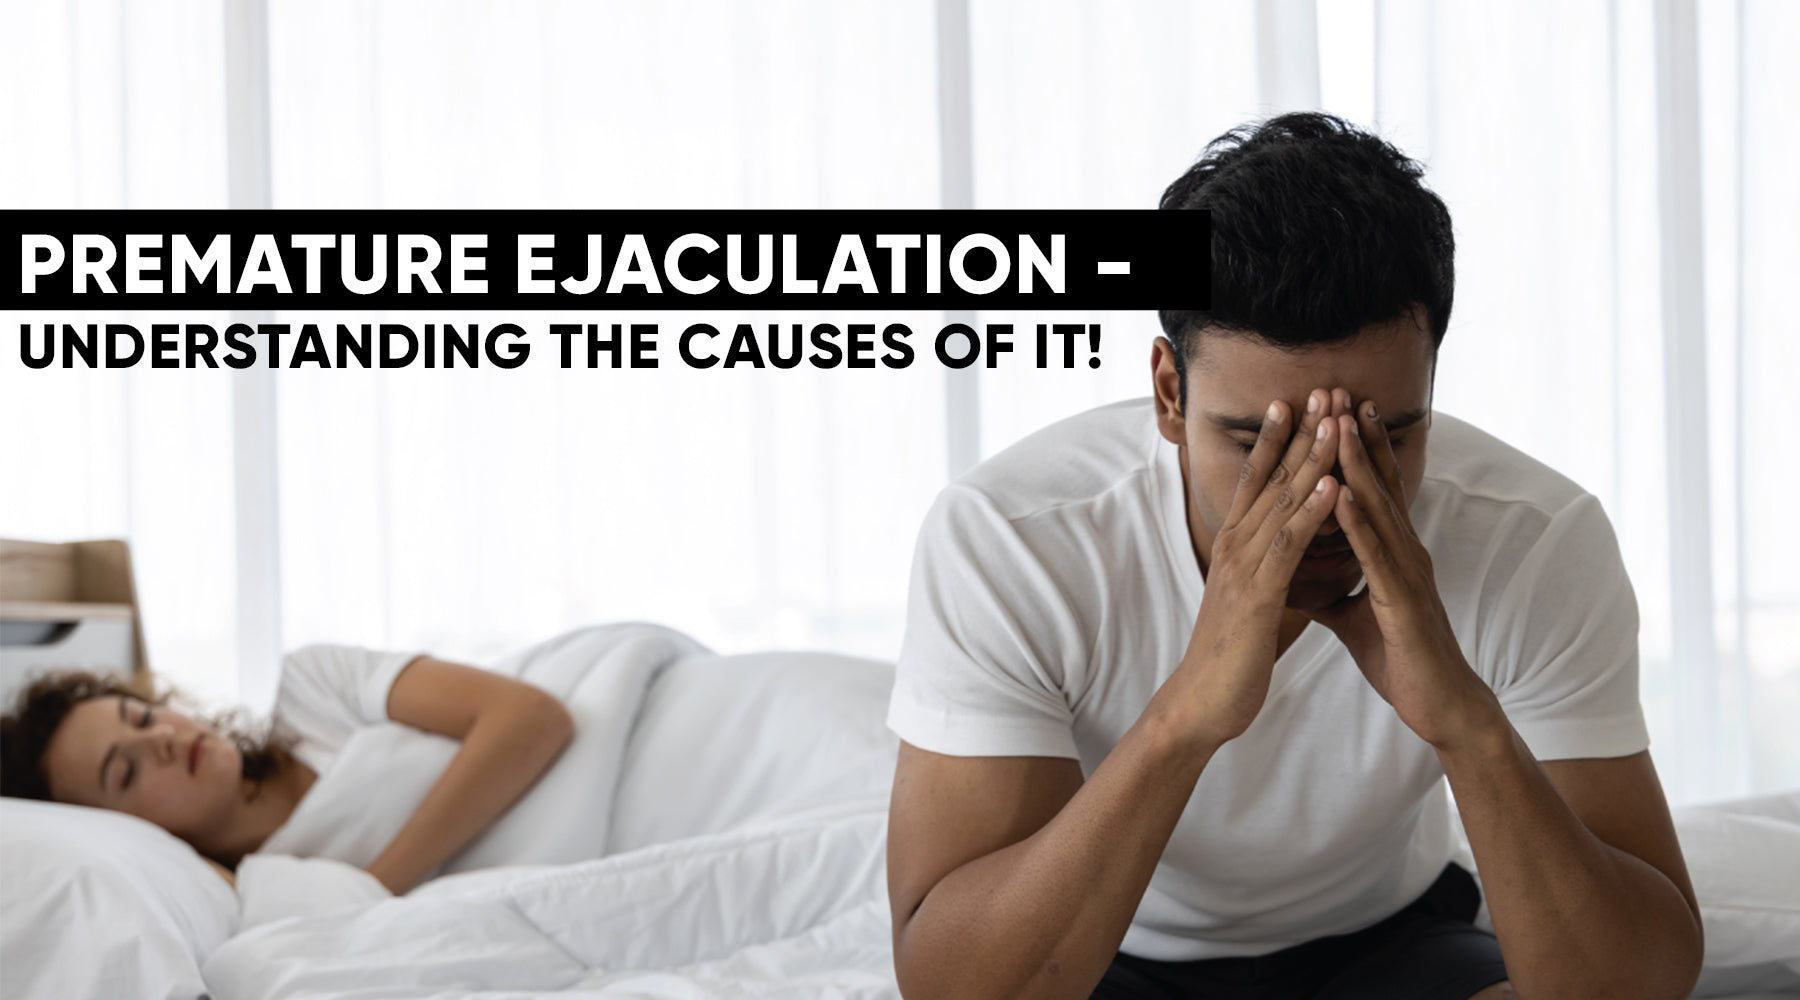 Premature Ejaculation Causes, Treatment, and Prevention